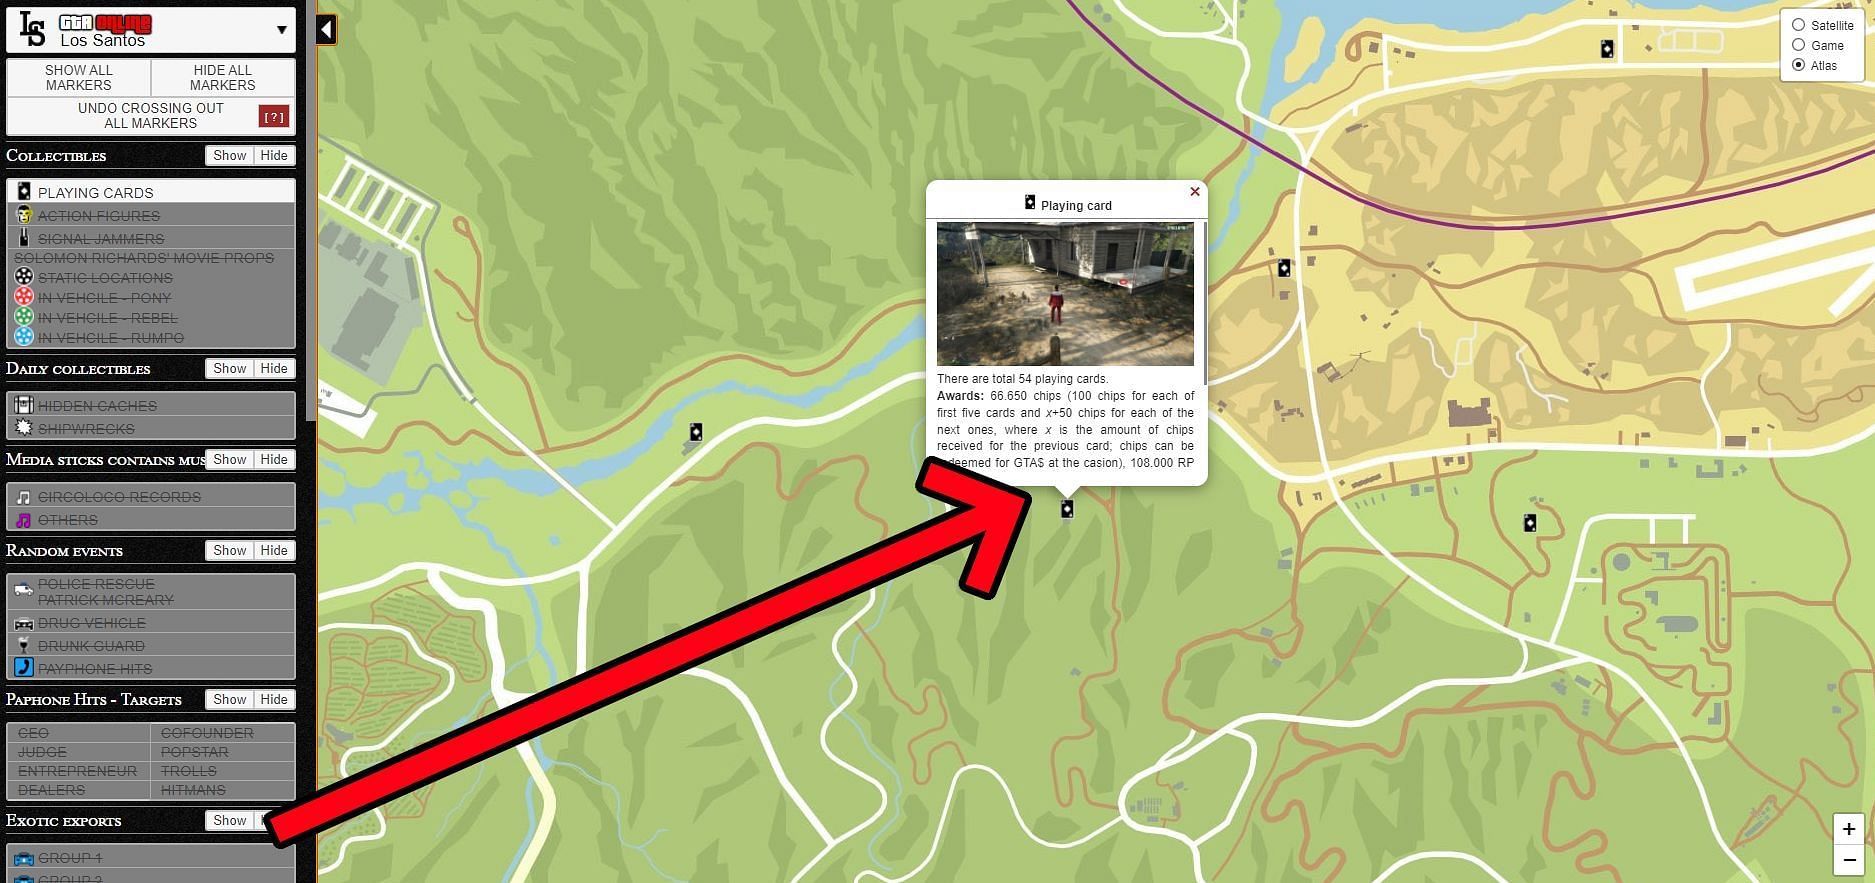 You can also click on the icon to see a picture of the location (Image via GTAWeb.eu)